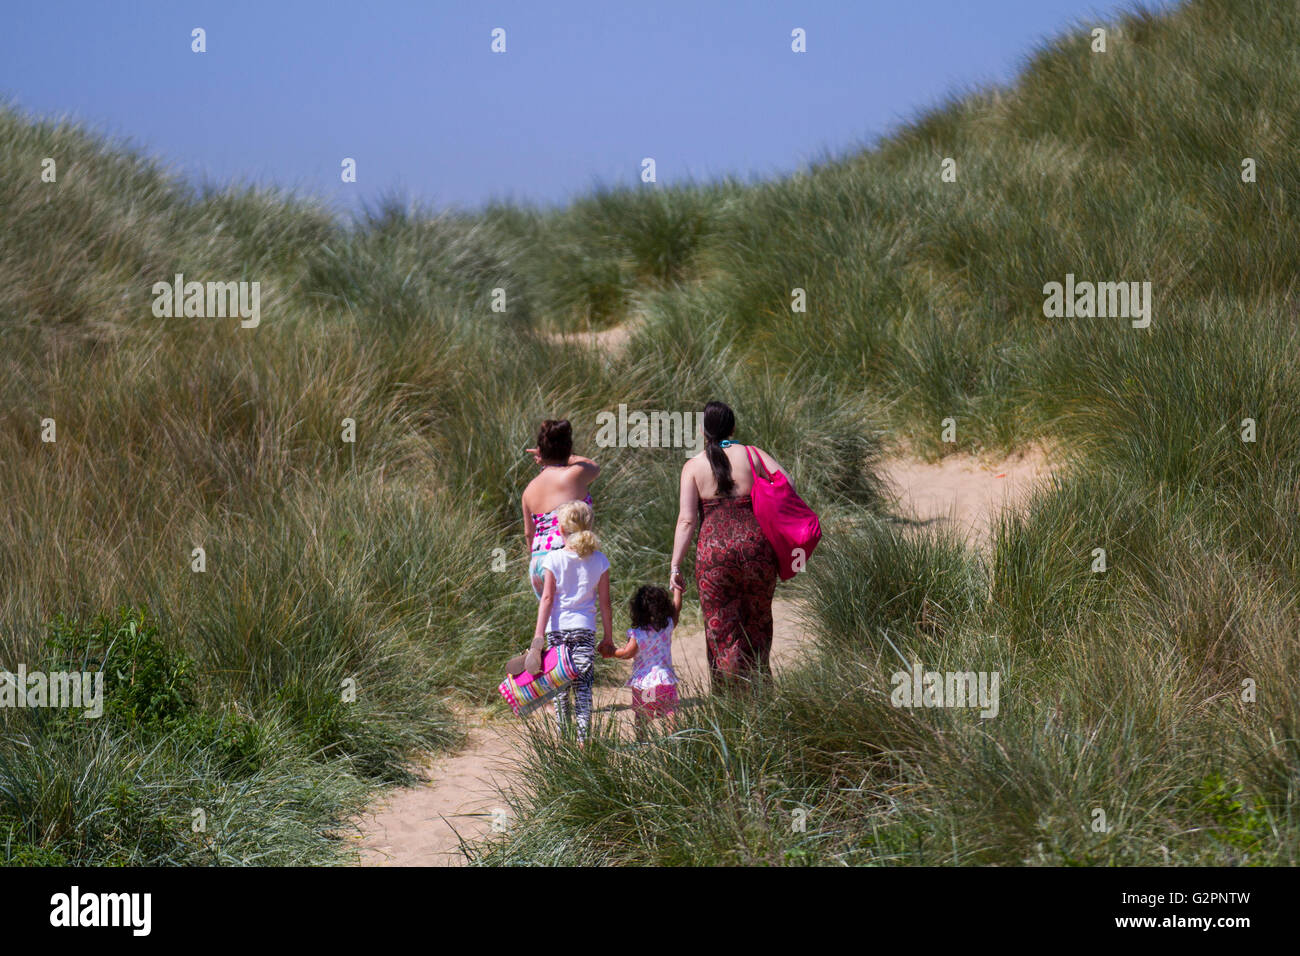 Sunny day at Ainsdale seaside sand dunes with Marram grass a landscape of the National Nature Coastal Reserve, Sefton coast, Southport, Merseyside, UK Stock Photo